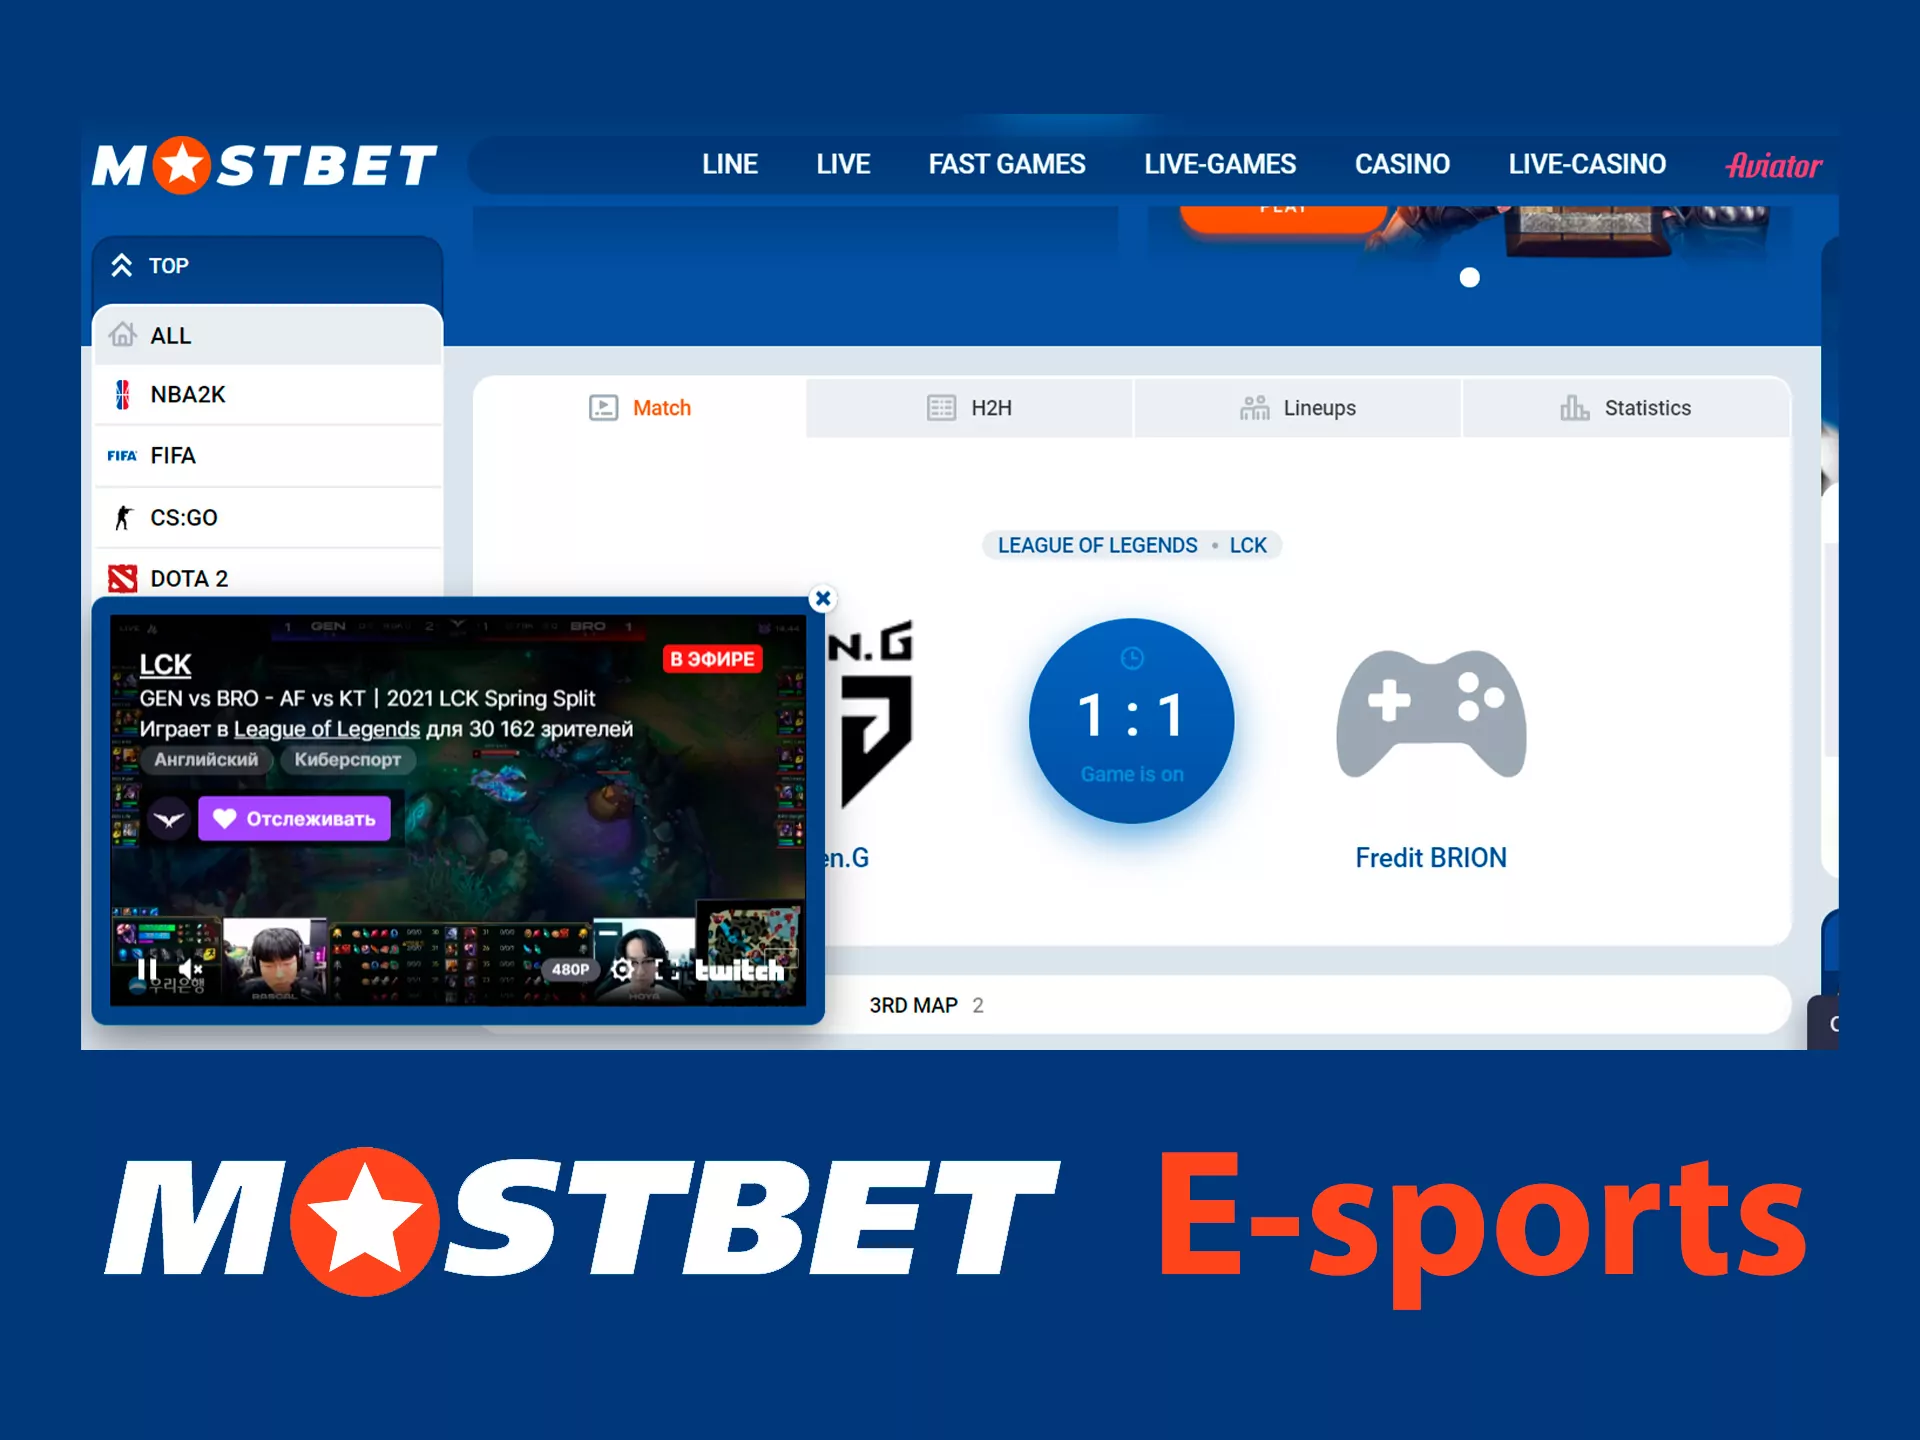 Online betting on eSports events with Mostbet.